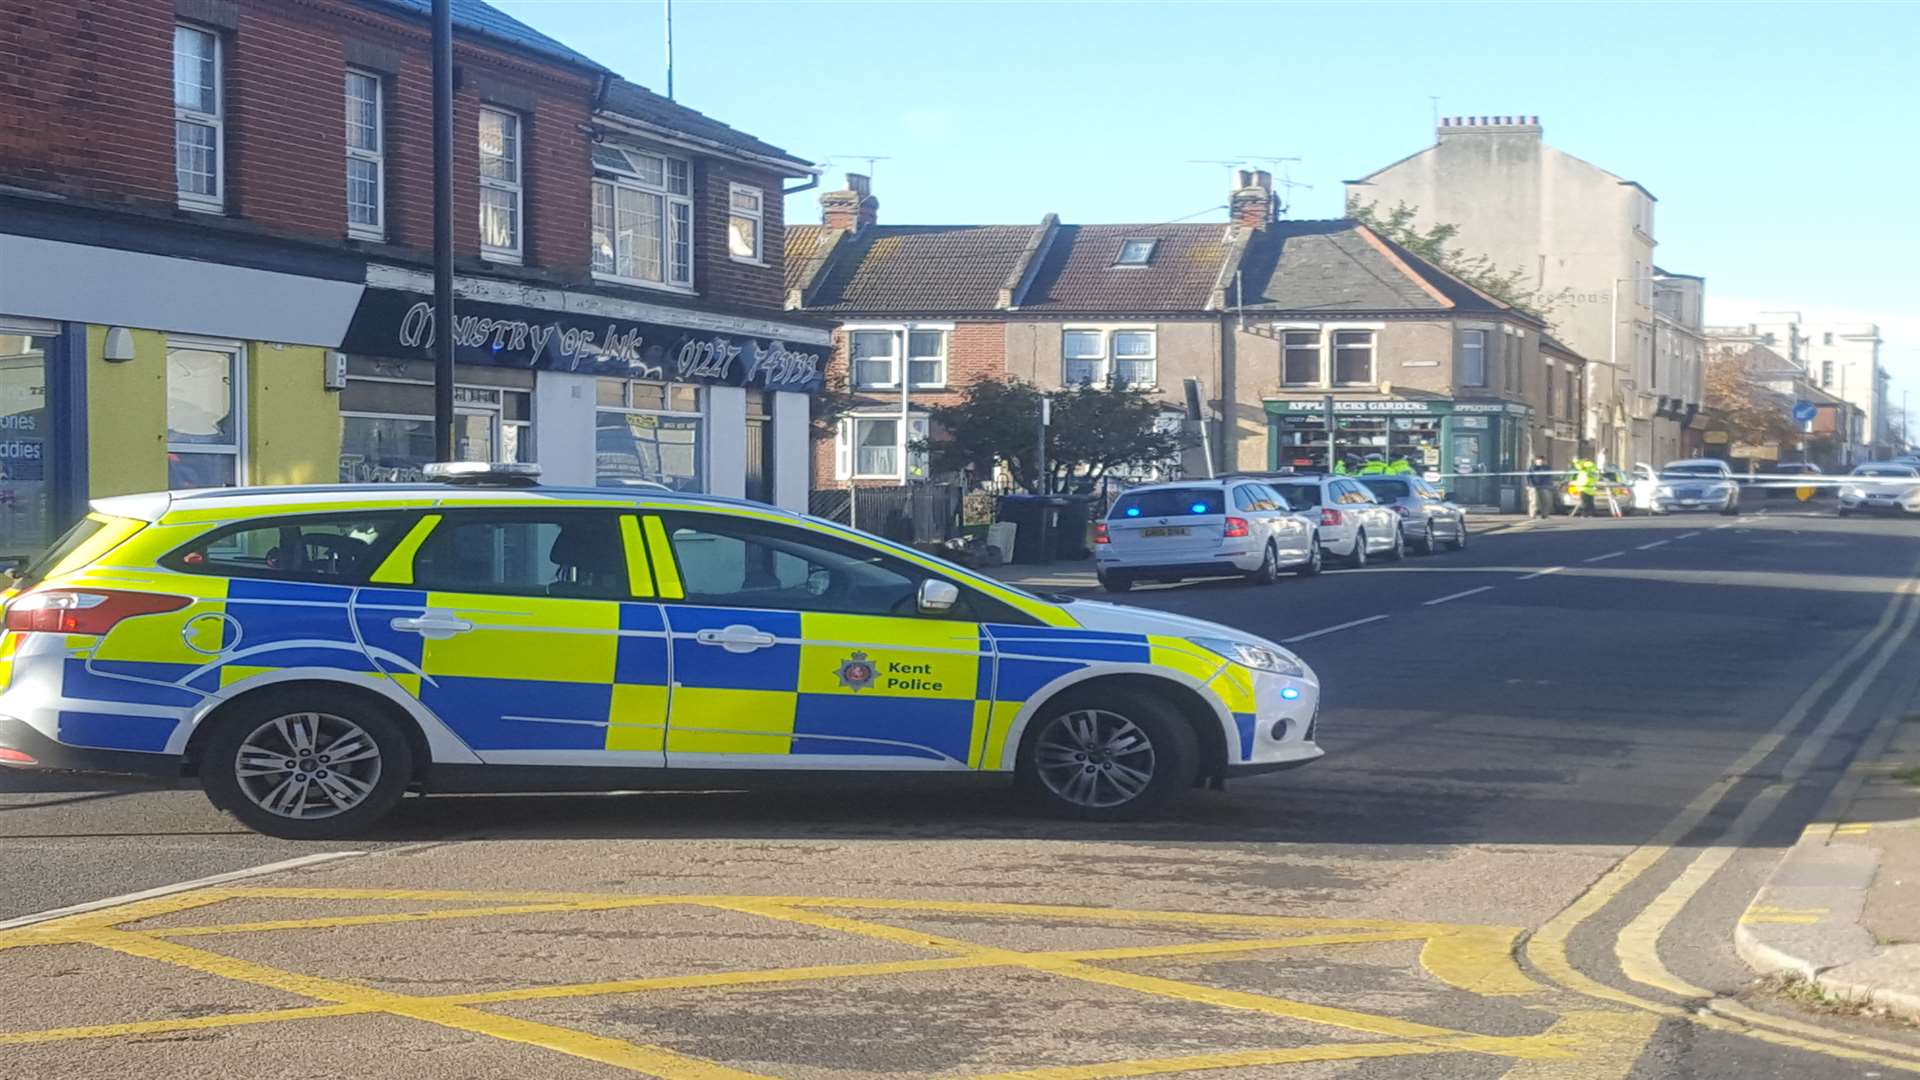 Police has cordoned off an area in Herne Bay town centre